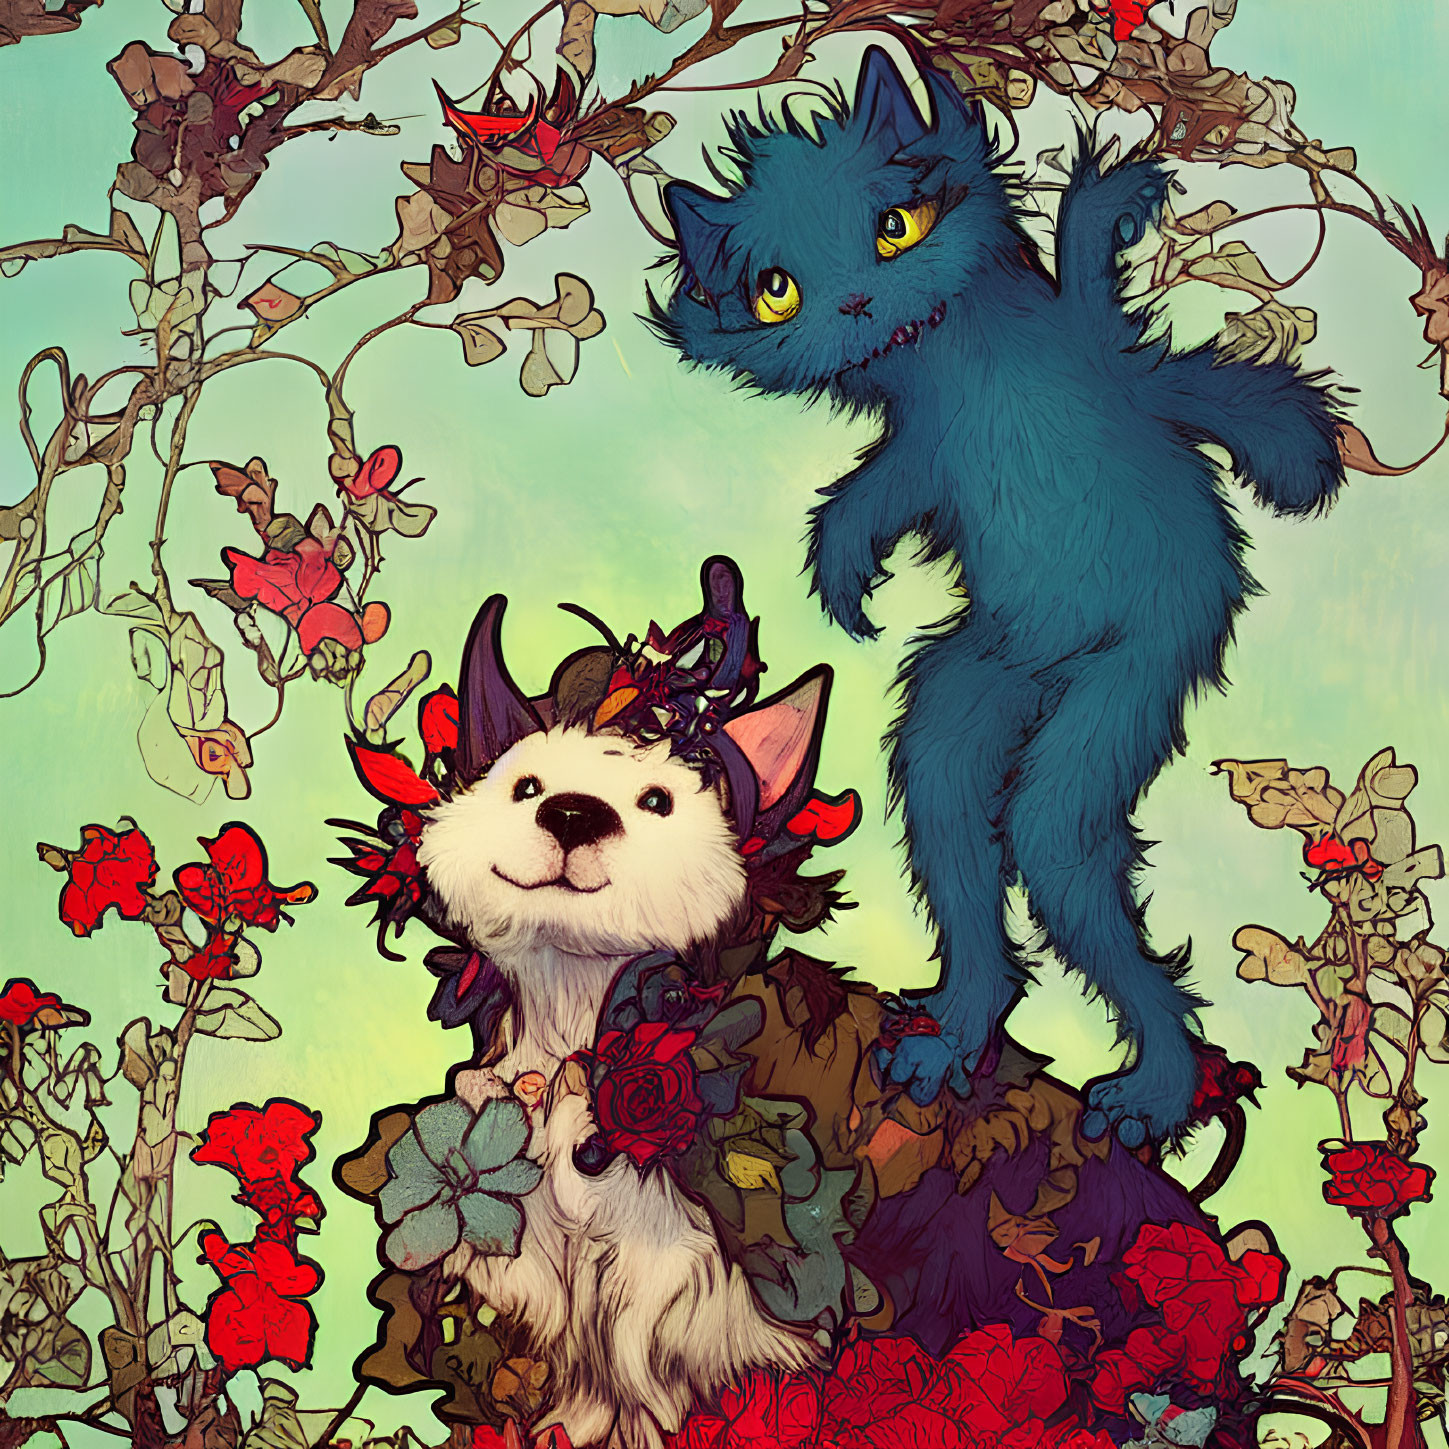 Fluffy white dog with red flowers and green leaves, blue cat in thorny vines on teal background